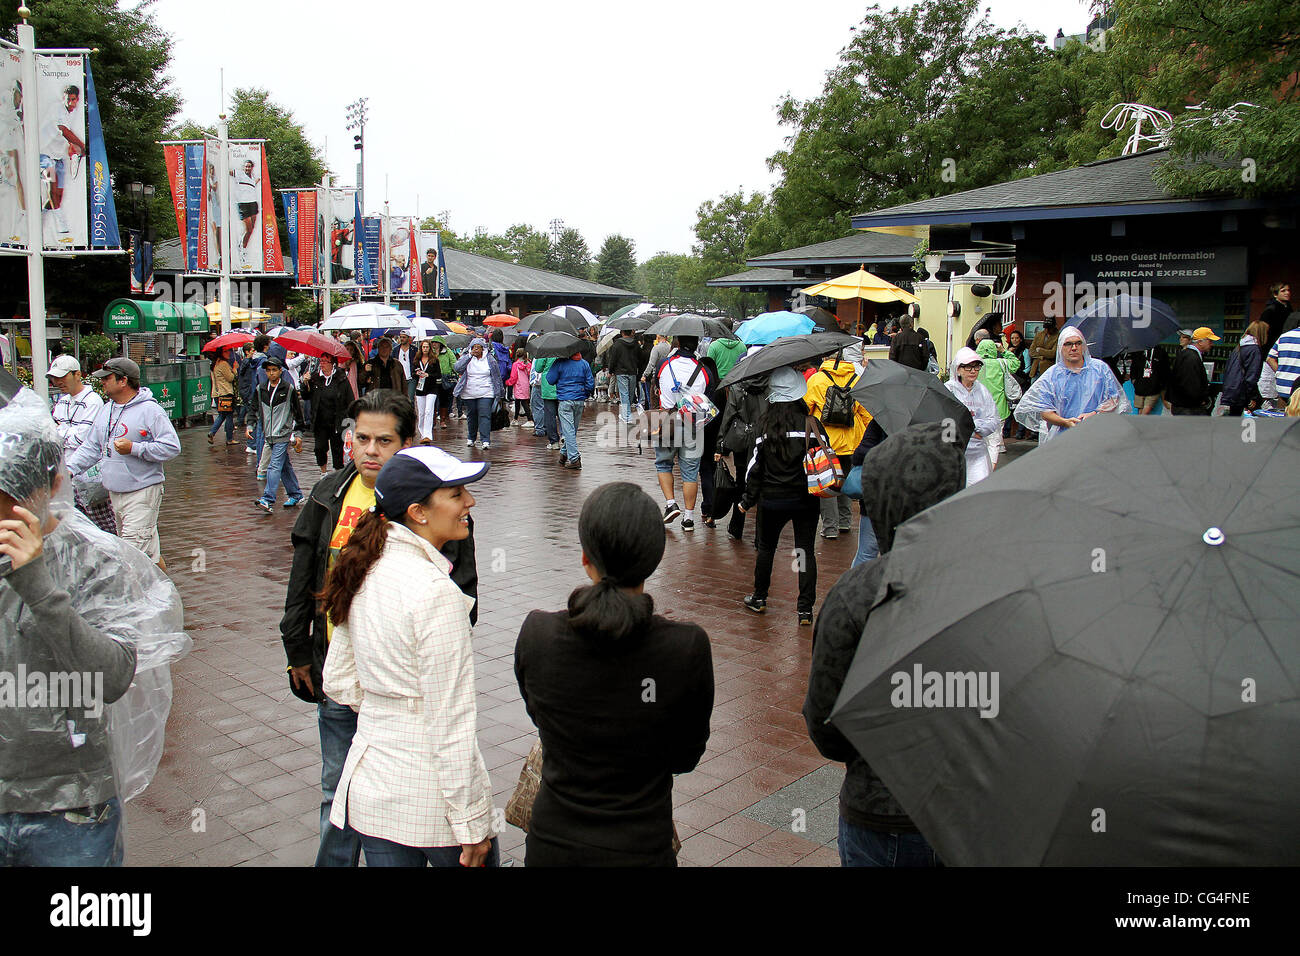 Fans brave the rain at the USTA Arthur Ashe Stadium in Flushing, Queens. The US Open men's tennis final championship match between top-seeded Rafael Nadal and third-seeded Novak Djokovic has been rescheduled at 4 p.m. on Monday, 13 September, because of r Stock Photo